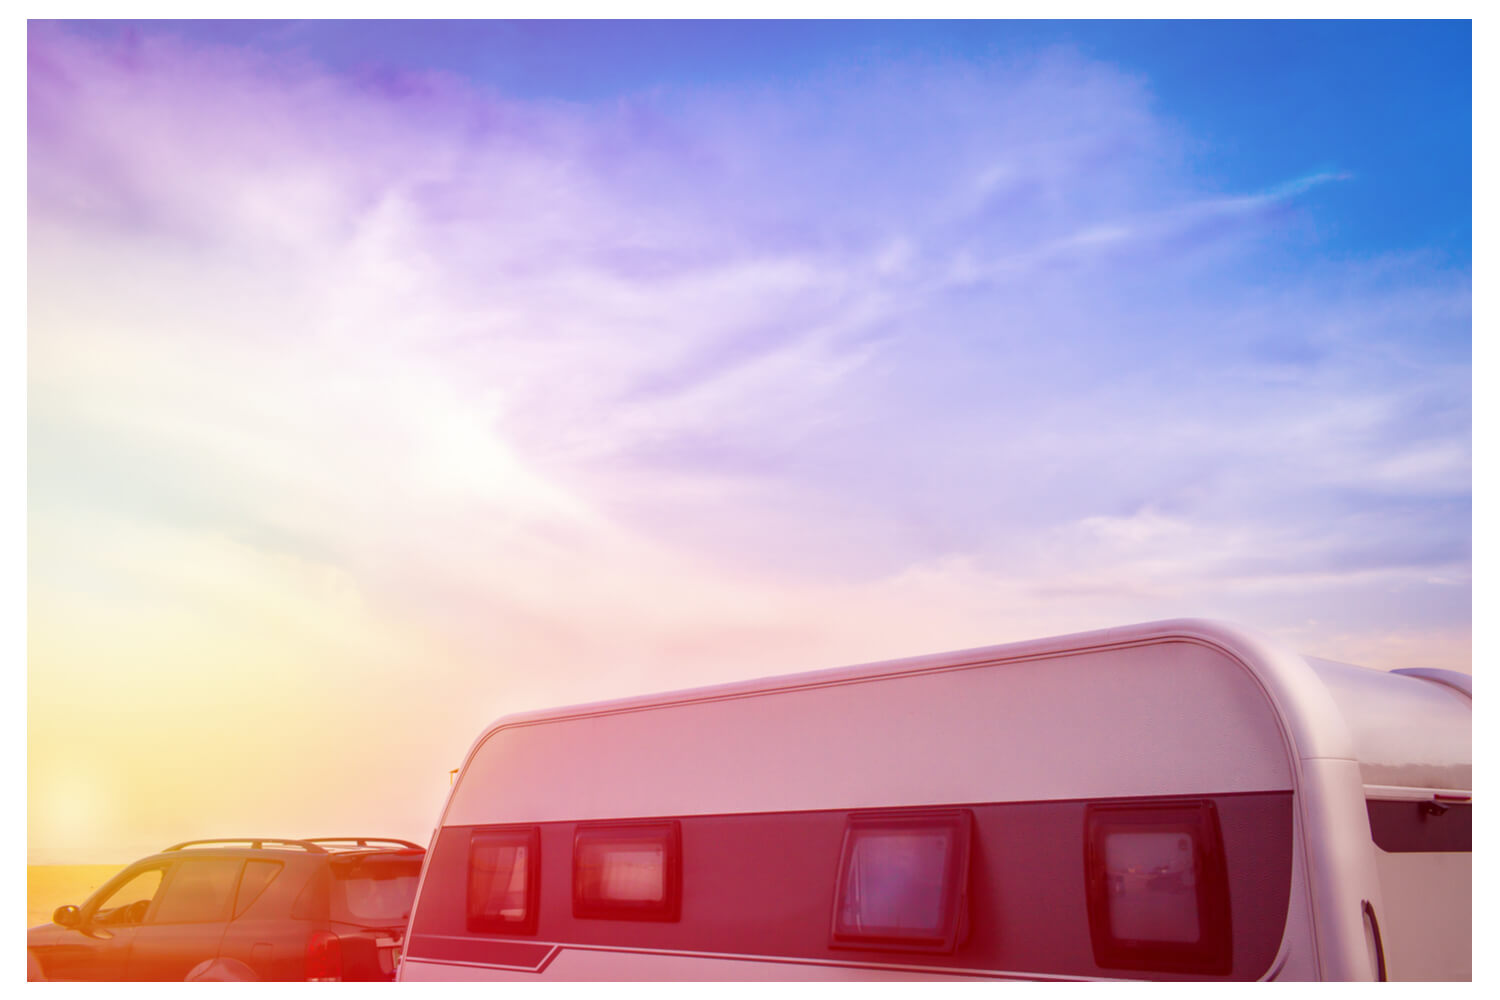 Carefree Covered RV Storage helps make family adventures happen